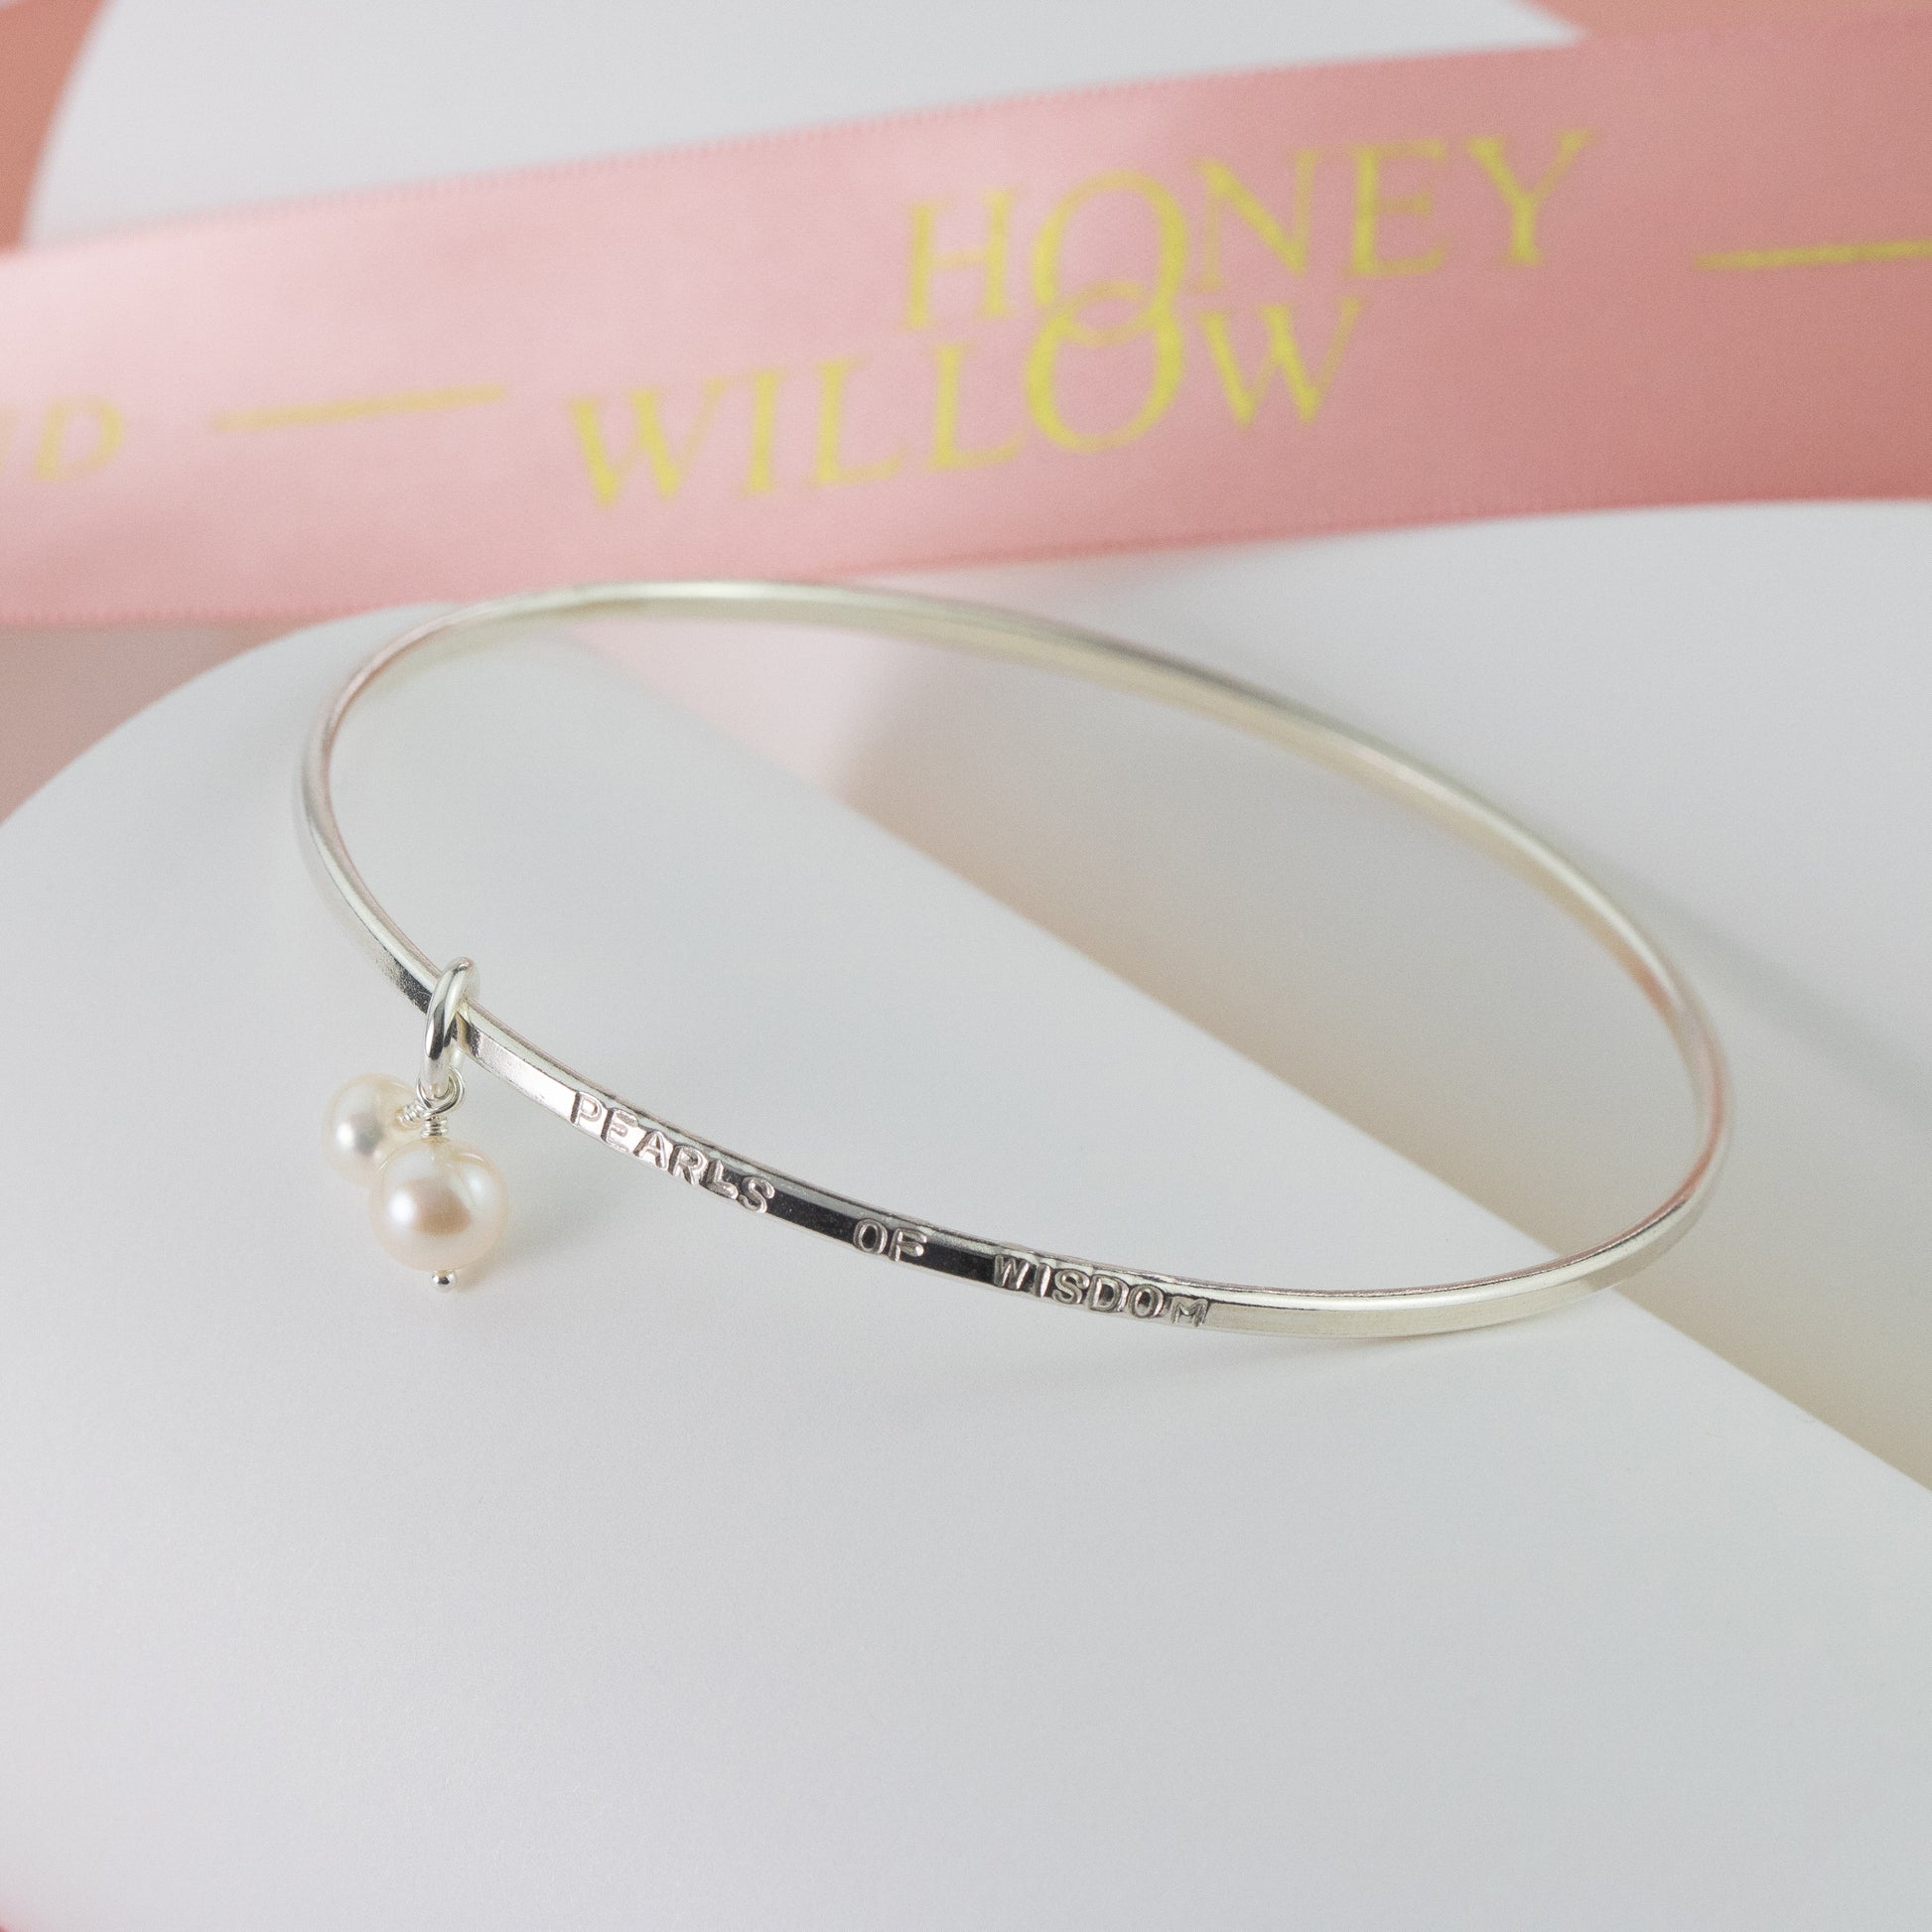 Gift for Mother - Pearls of Wisdom Bangle - Hand-Stamped Silver